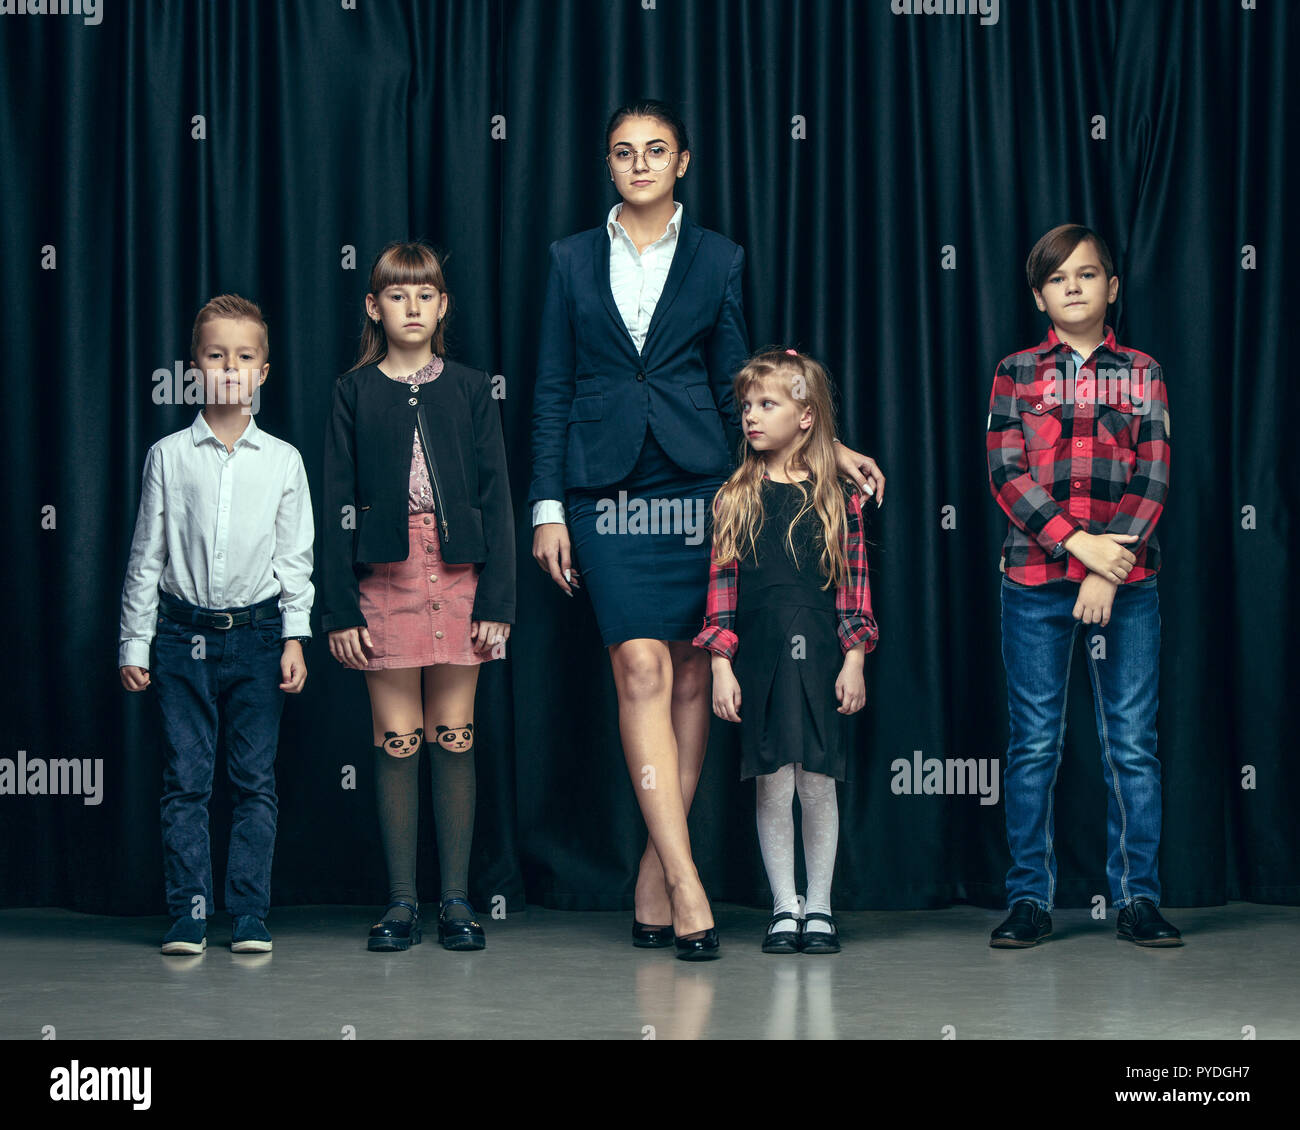 Cute smiling happy stylish children and female teacher on dark background.  Beautiful stylish teen girls and boy standing together and posing on the school  stage in front of the curtain. Classic style.